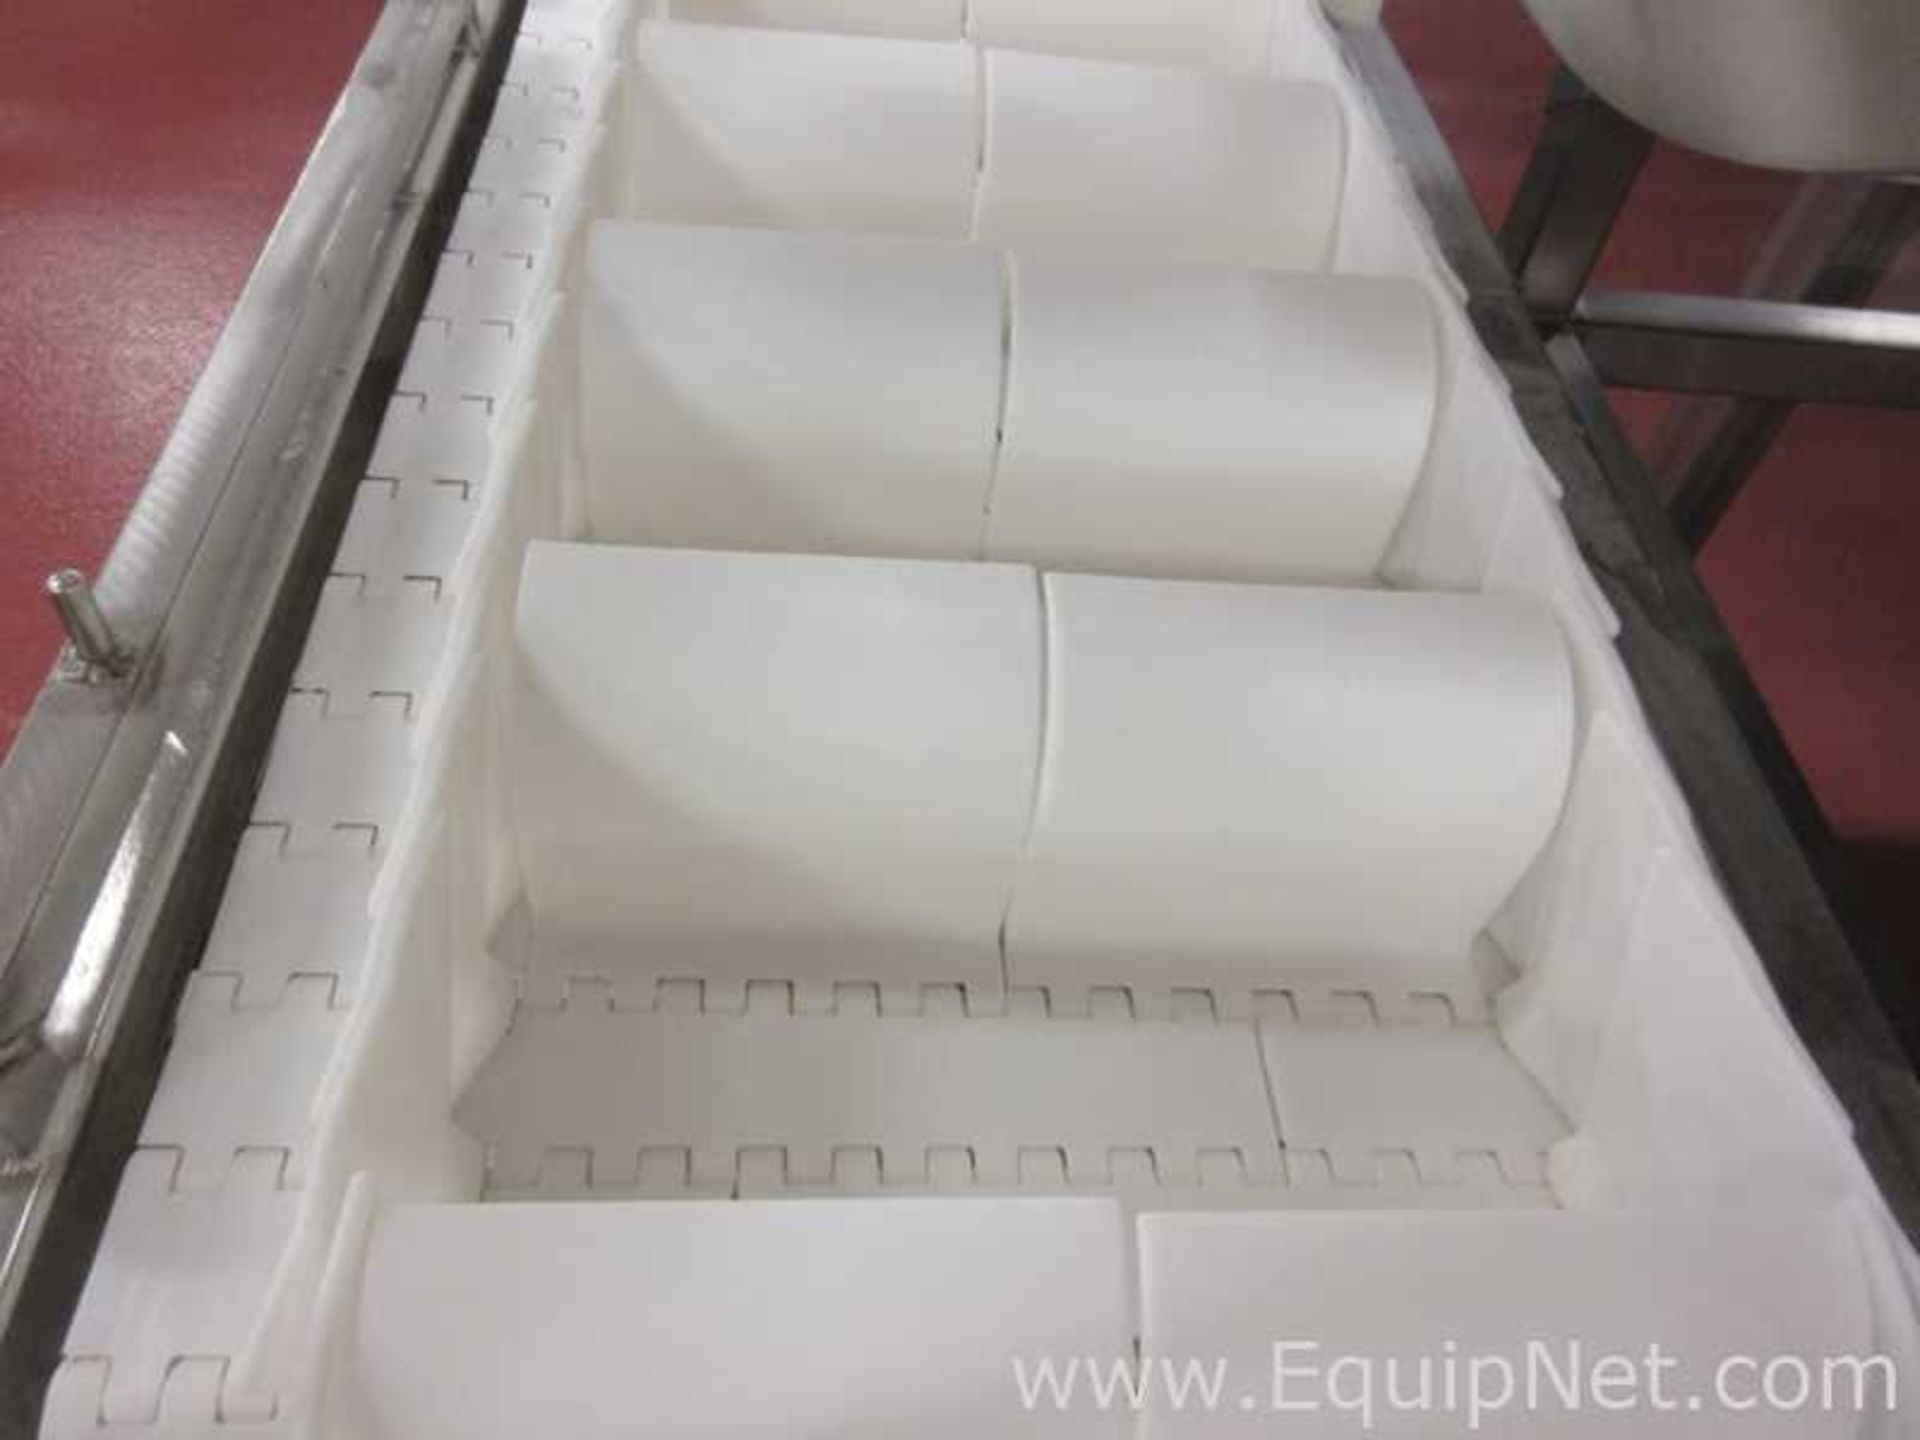 Incline Z Style Food Grade Conveyor Approx. 20 Foot High - Image 4 of 9